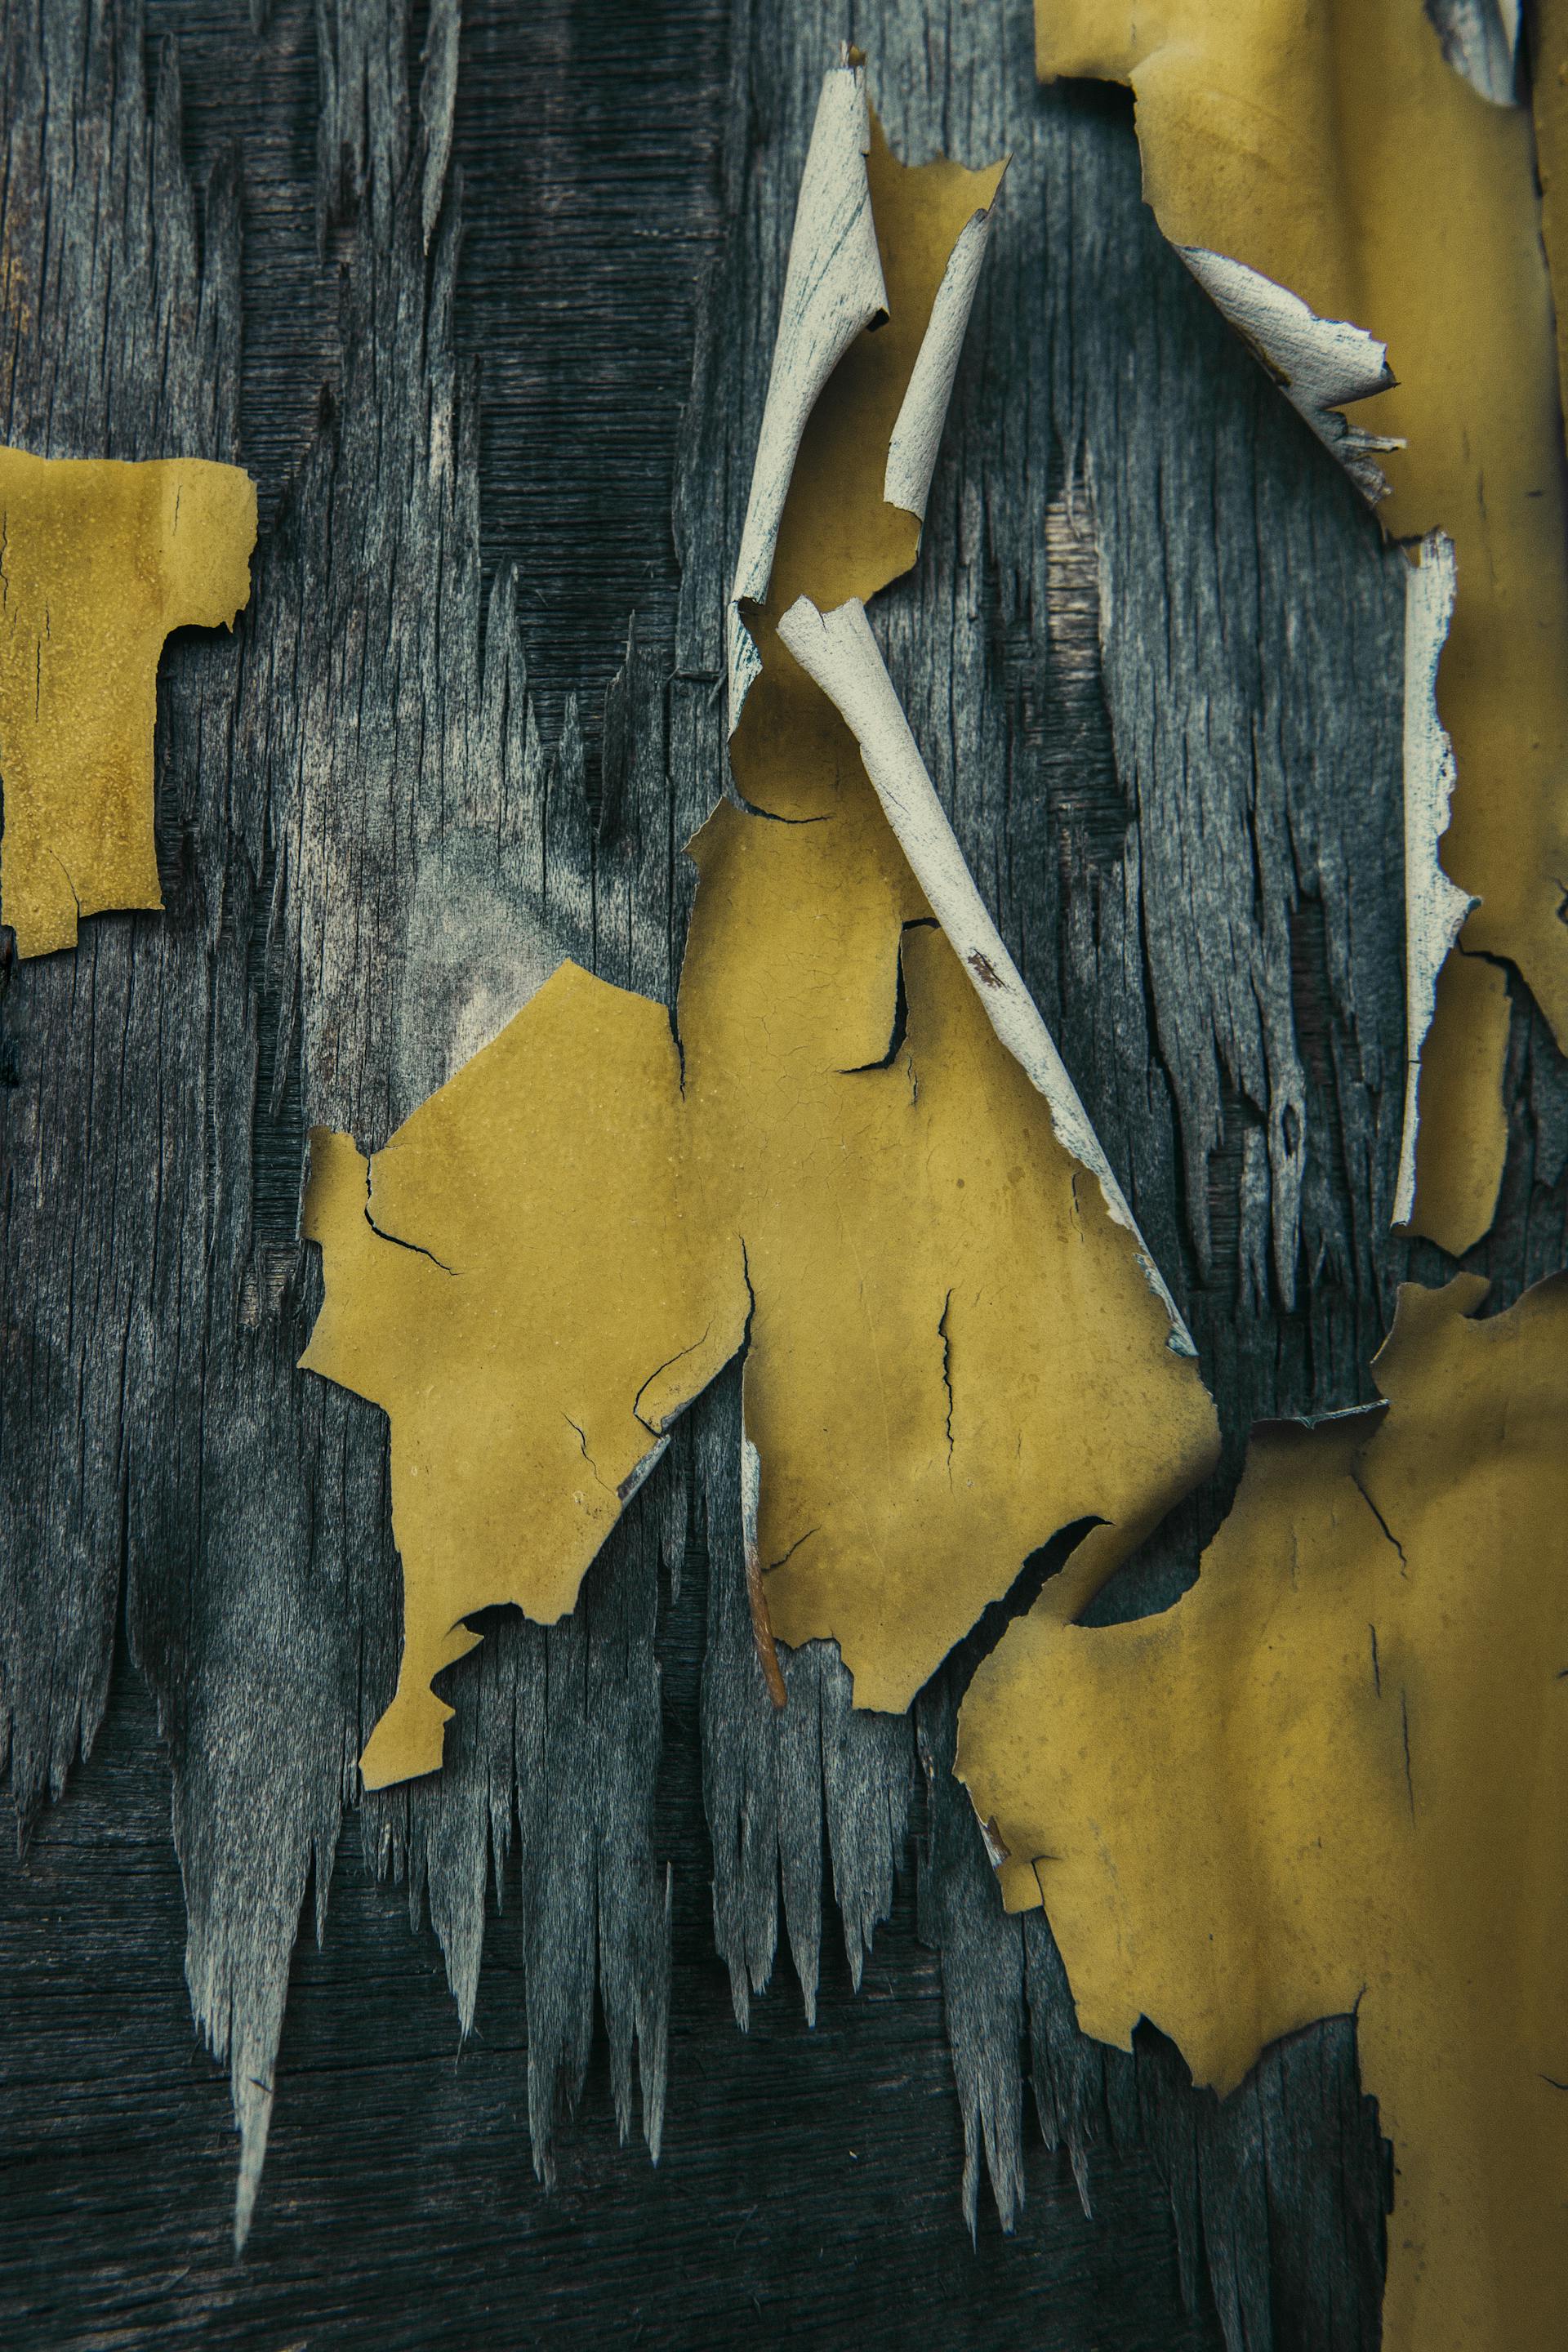 Victoria notices the old yellow paint wasn't scraped off before repainting the house | Source: Pexels